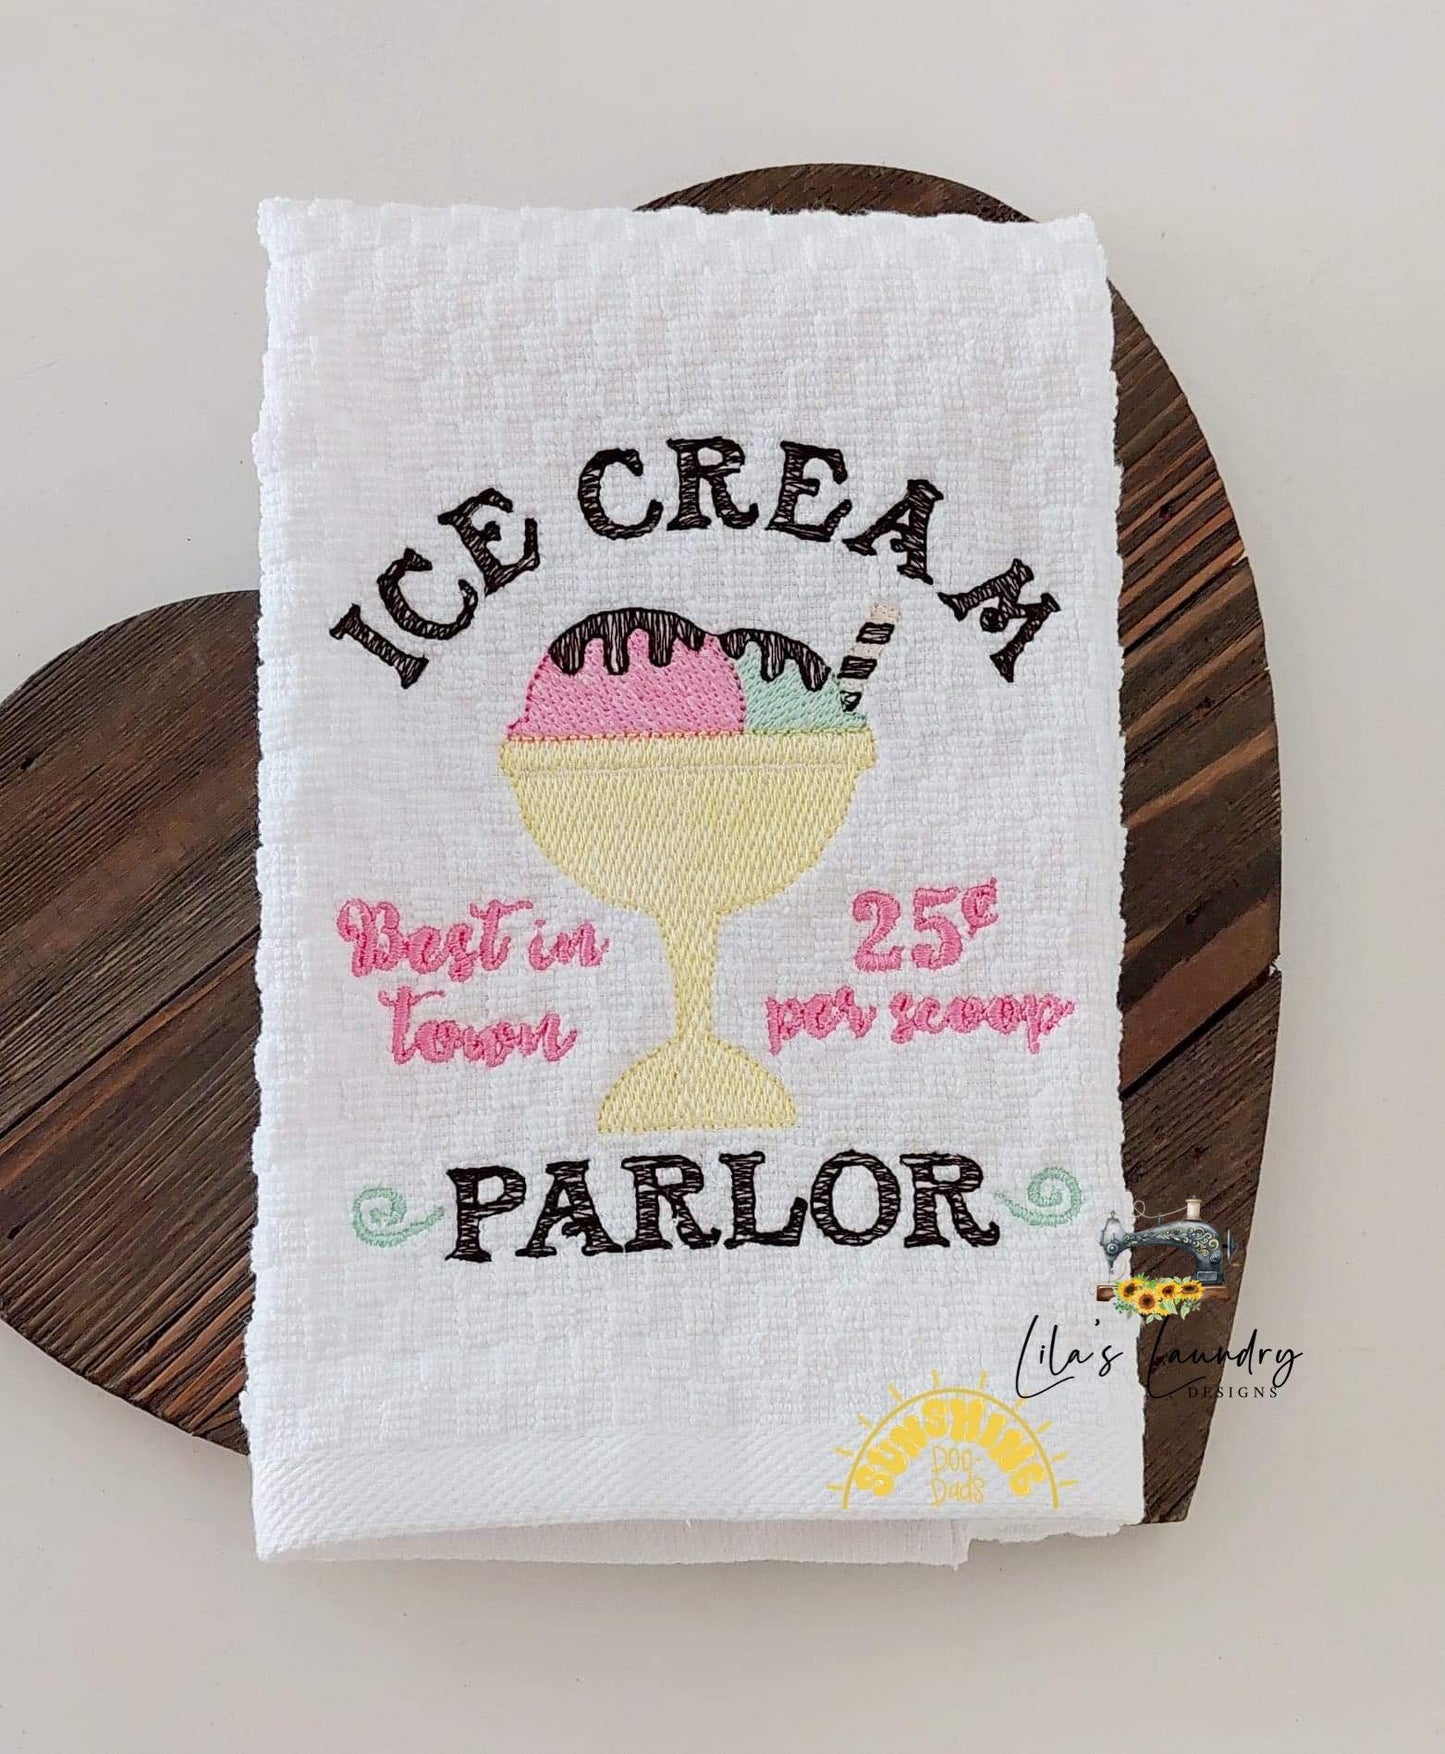 Ice Cream Parlor - 3 sizes- Digital Embroidery Design